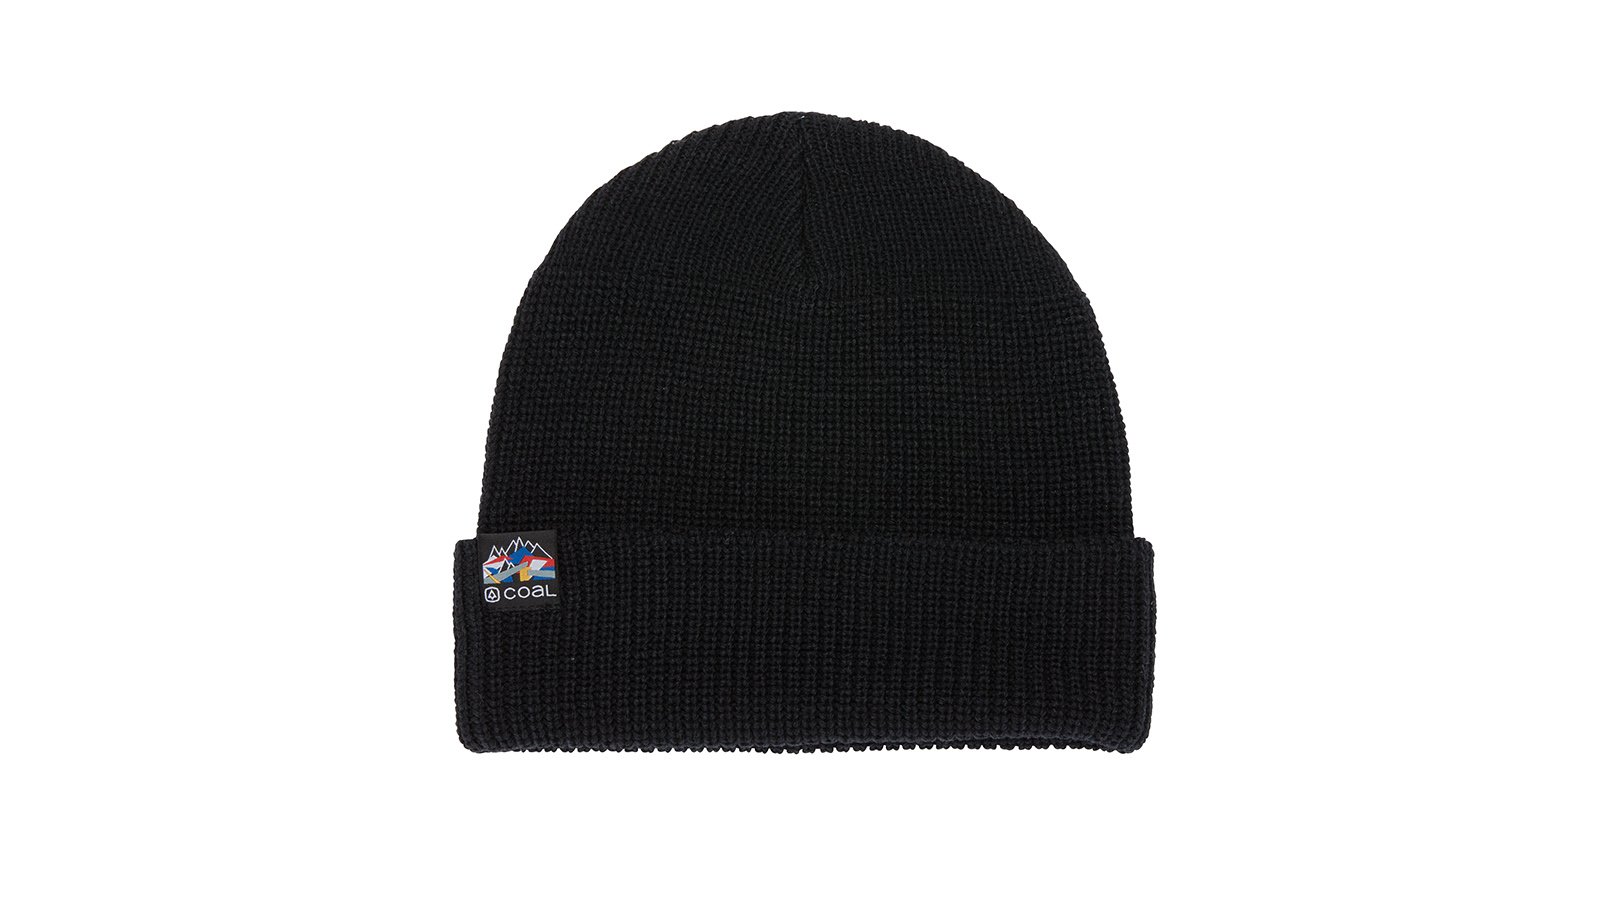 Coal FW20/21 Beanies Preview